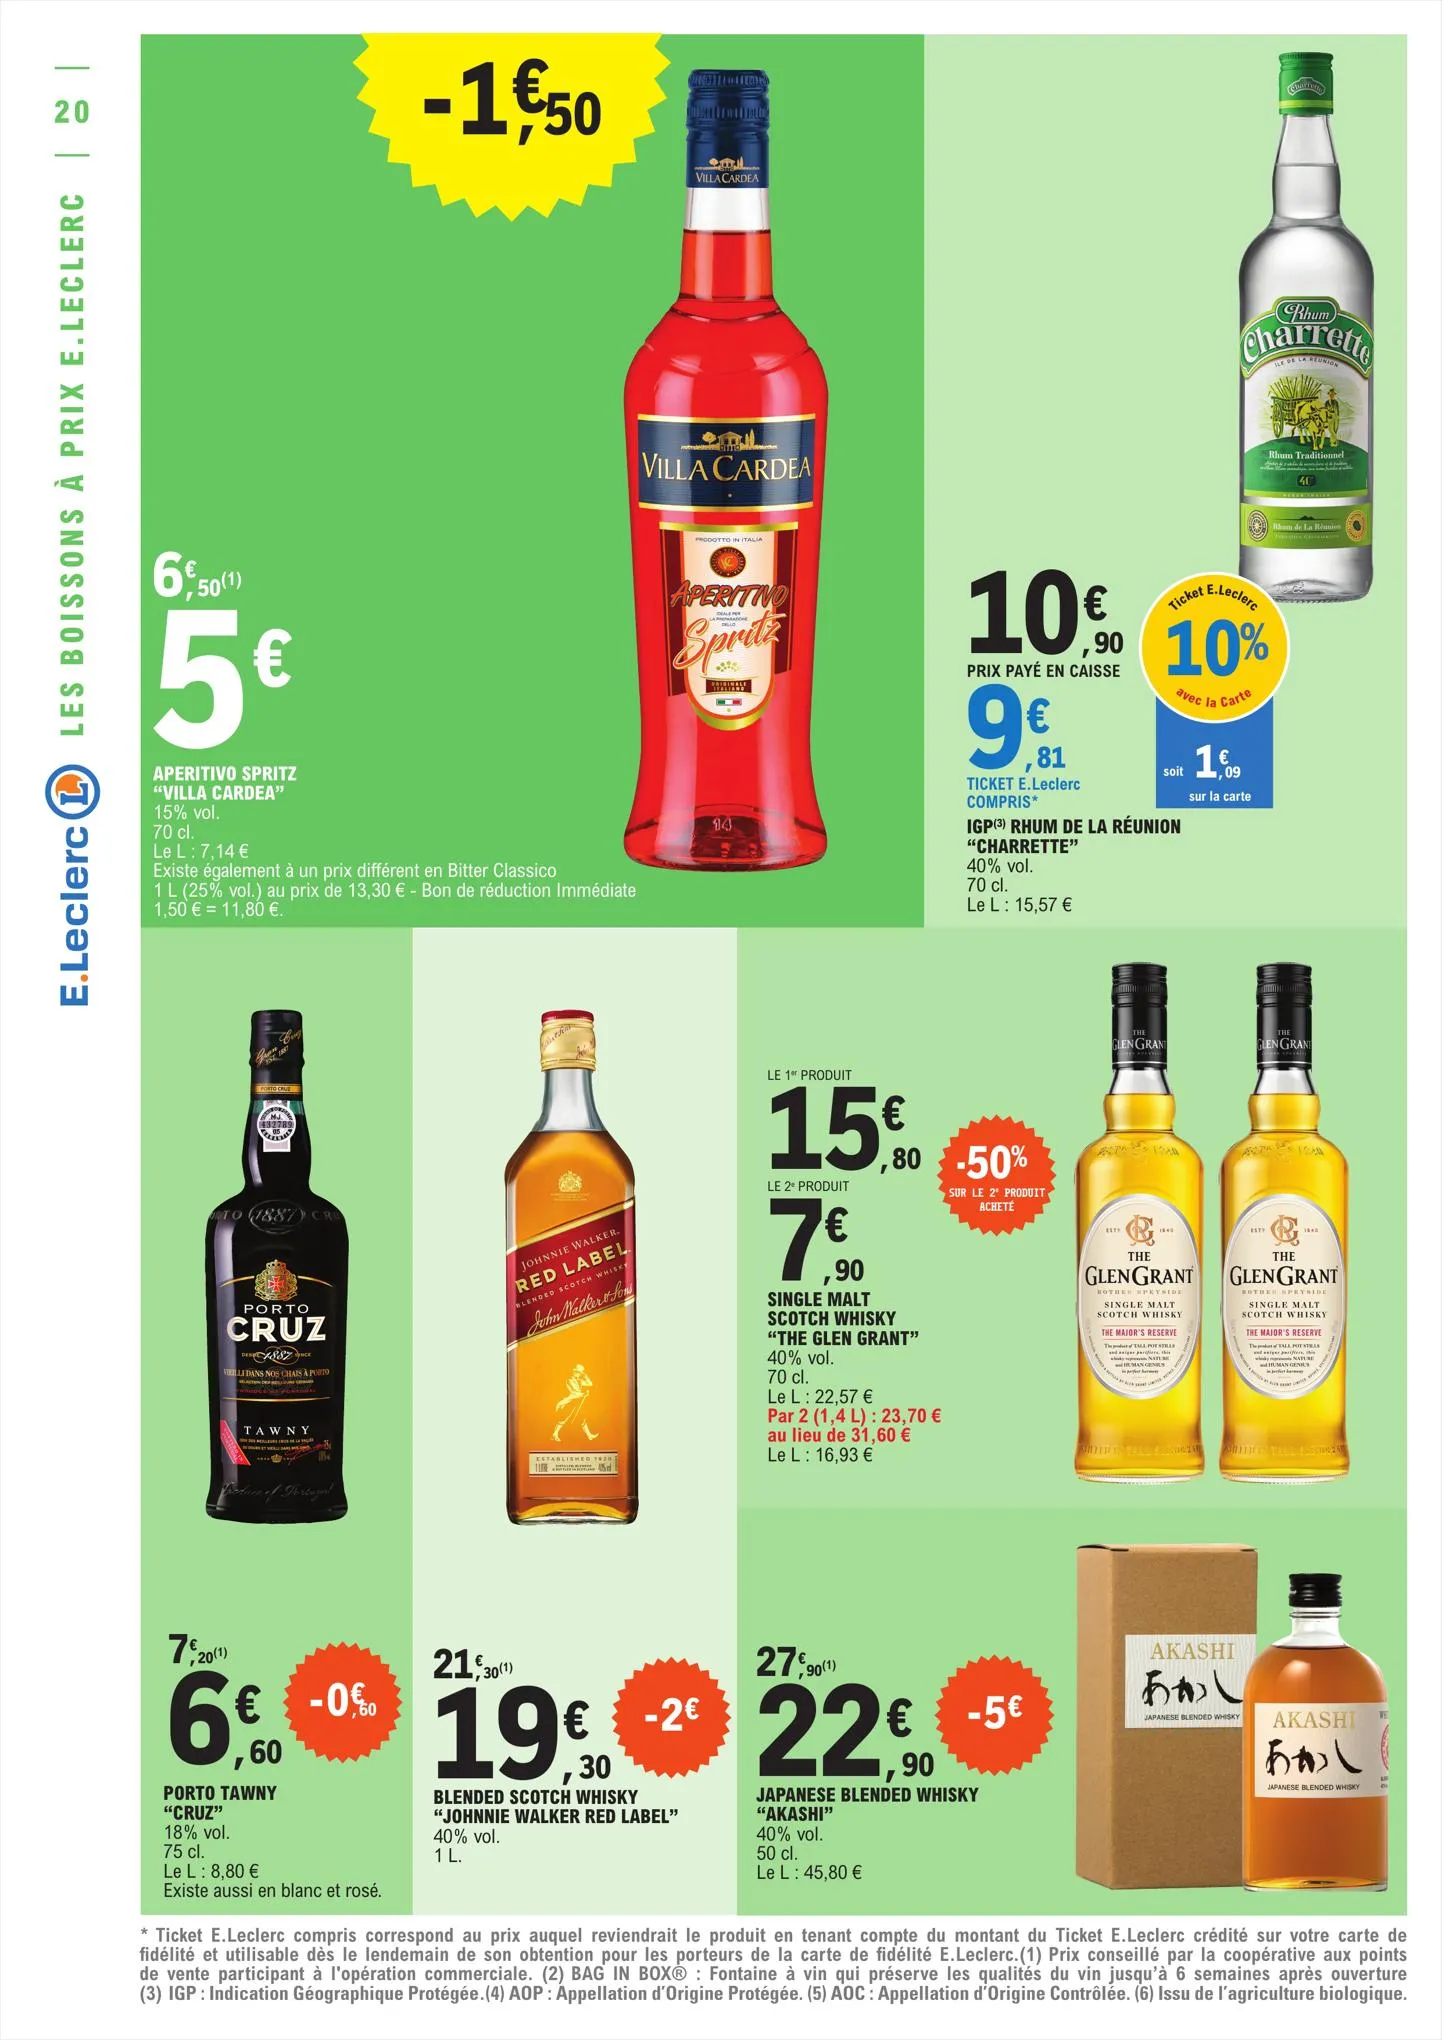 Catalogue Relance Alimentaire 10 - Mixte, page 00020